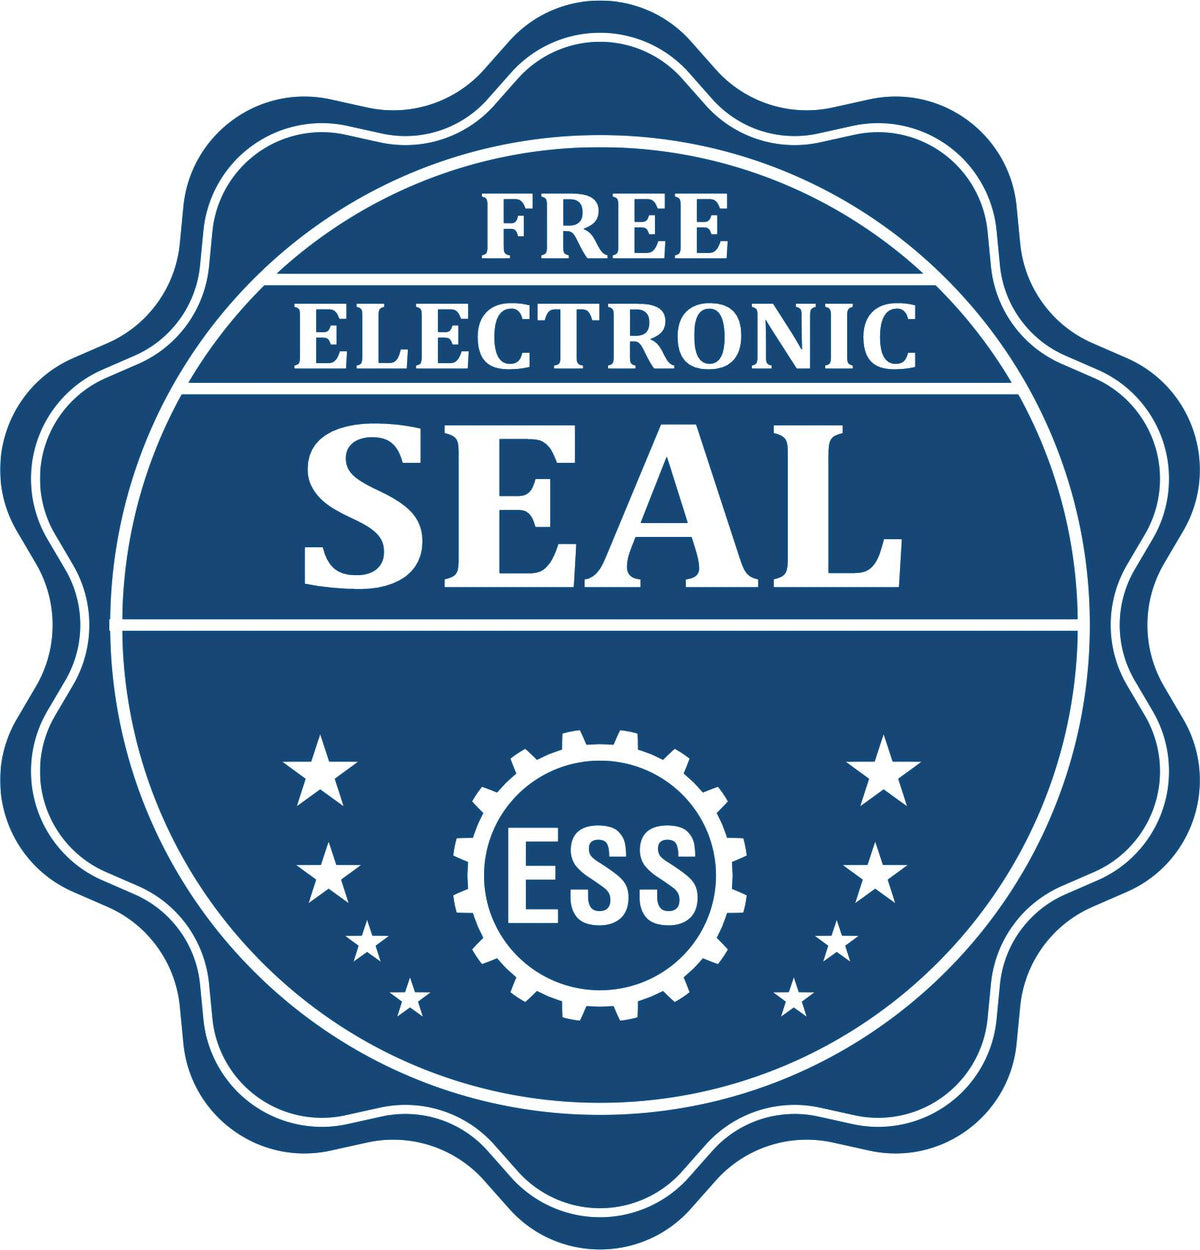 A badge showing a free electronic seal for the Slim Pre-Inked Pennsylvania Landscape Architect Seal Stamp with stars and the ESS gear on the emblem.